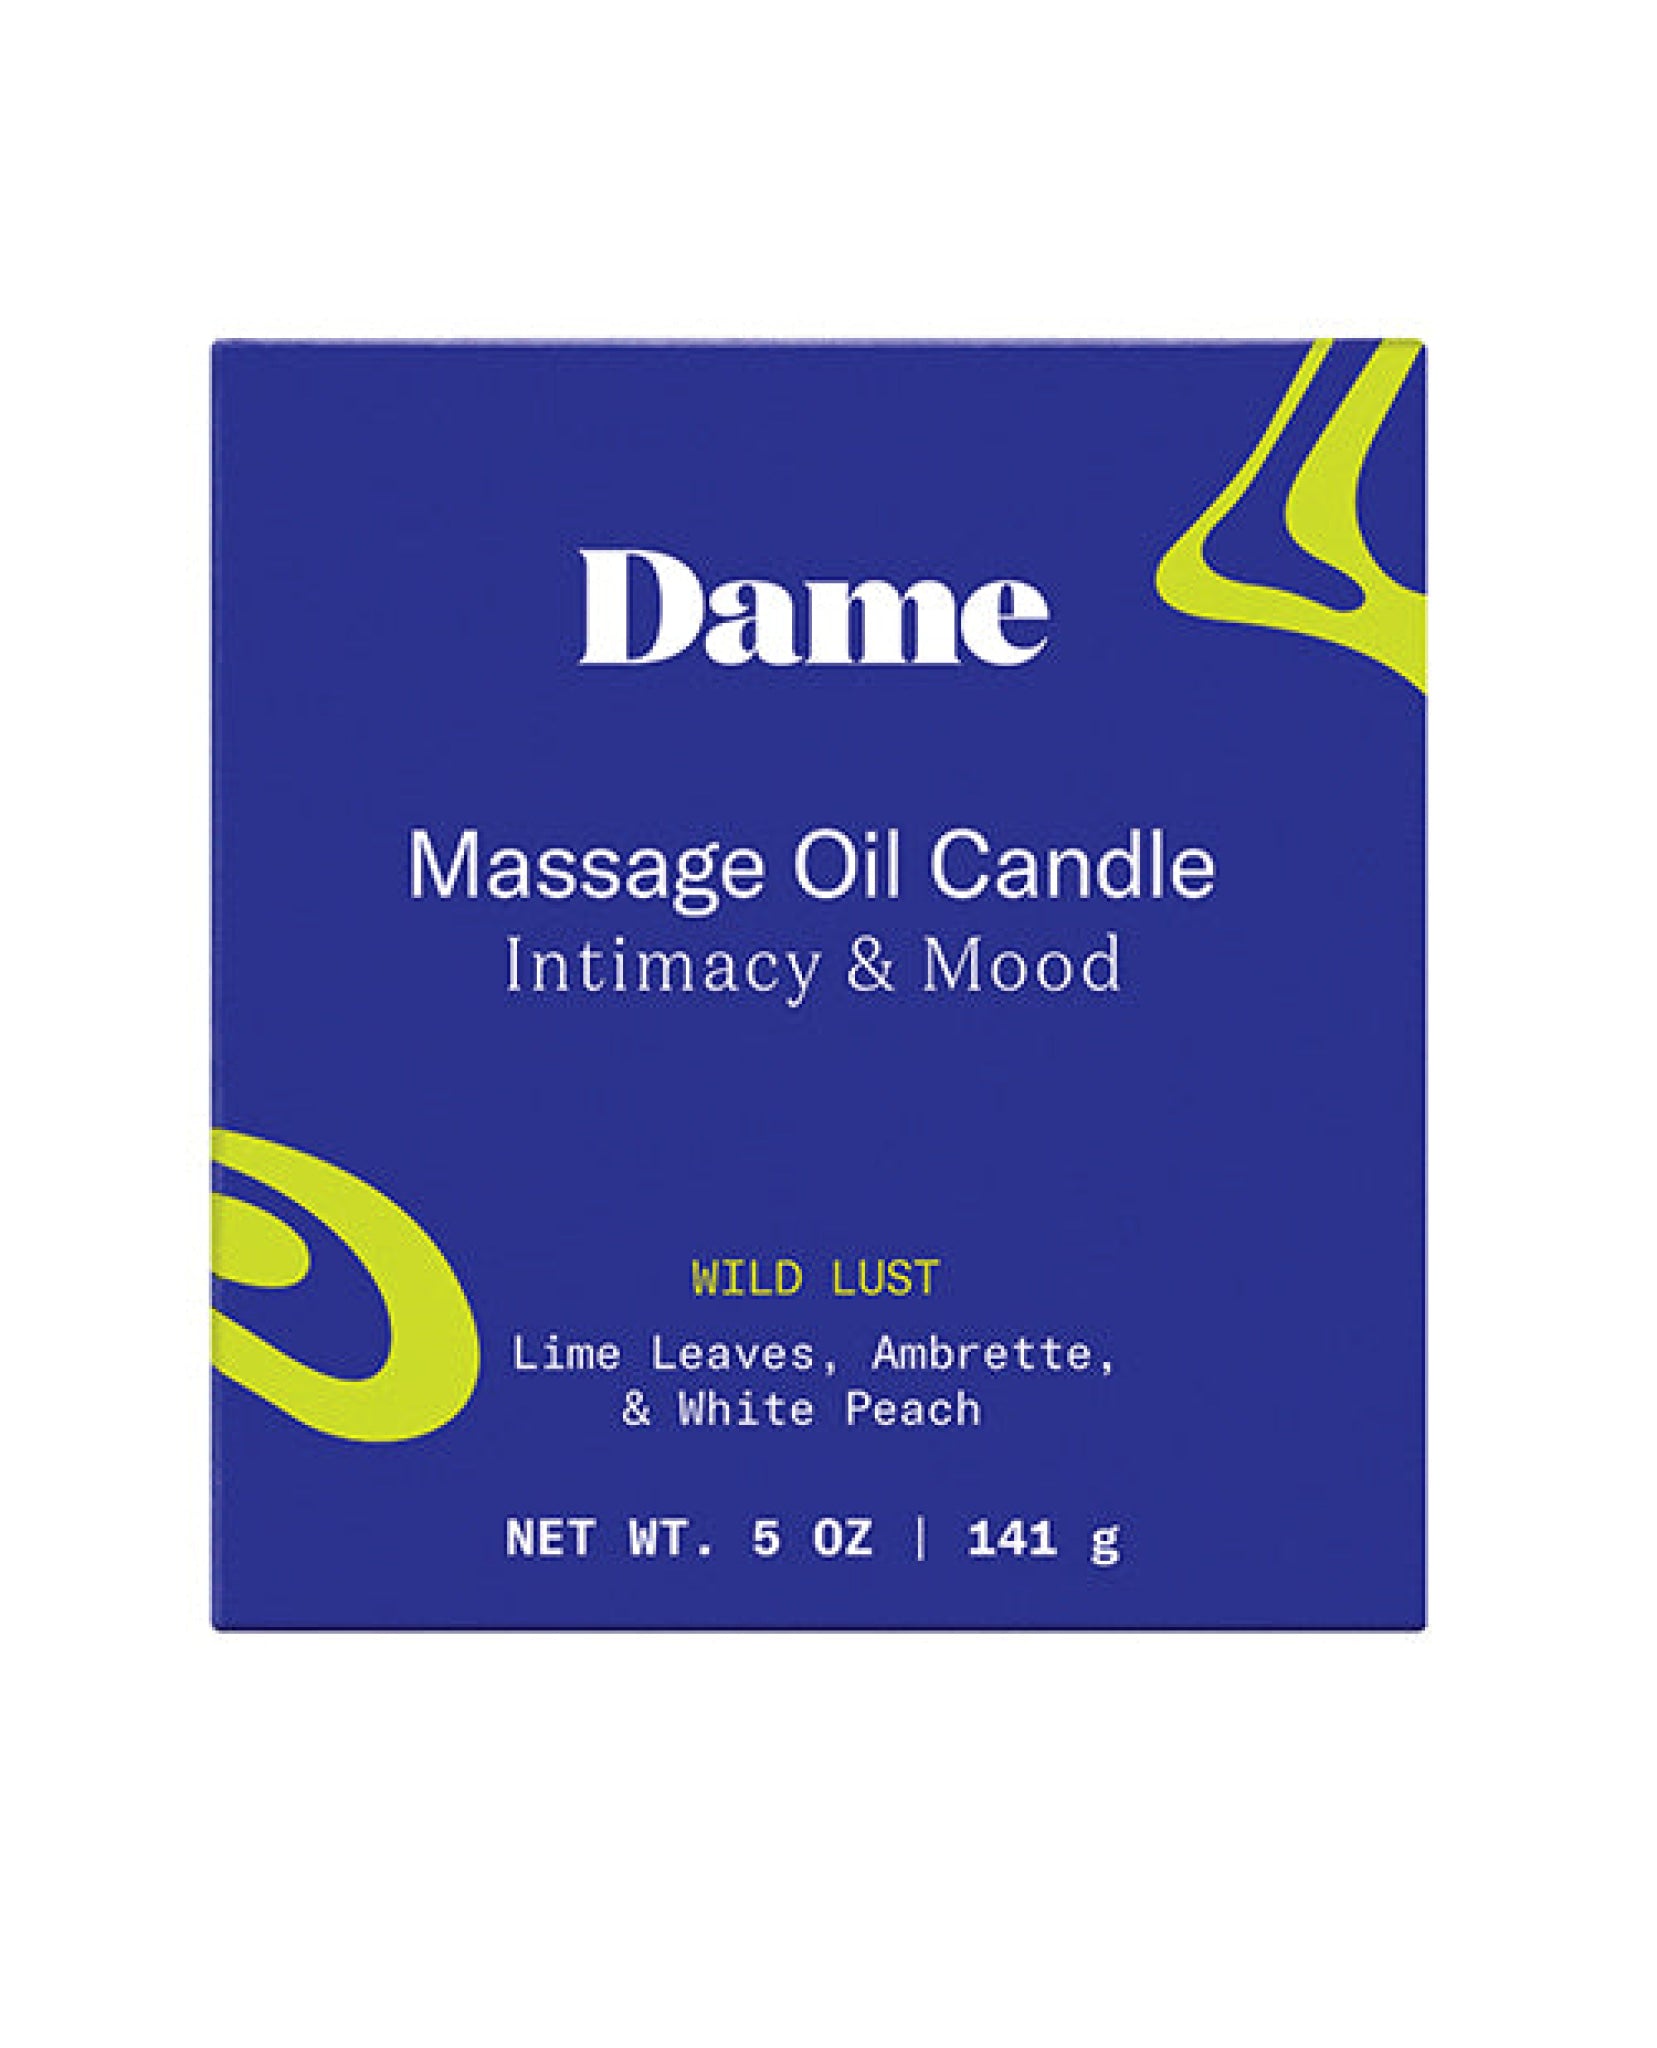 Dame Massage Oil Candle Dame